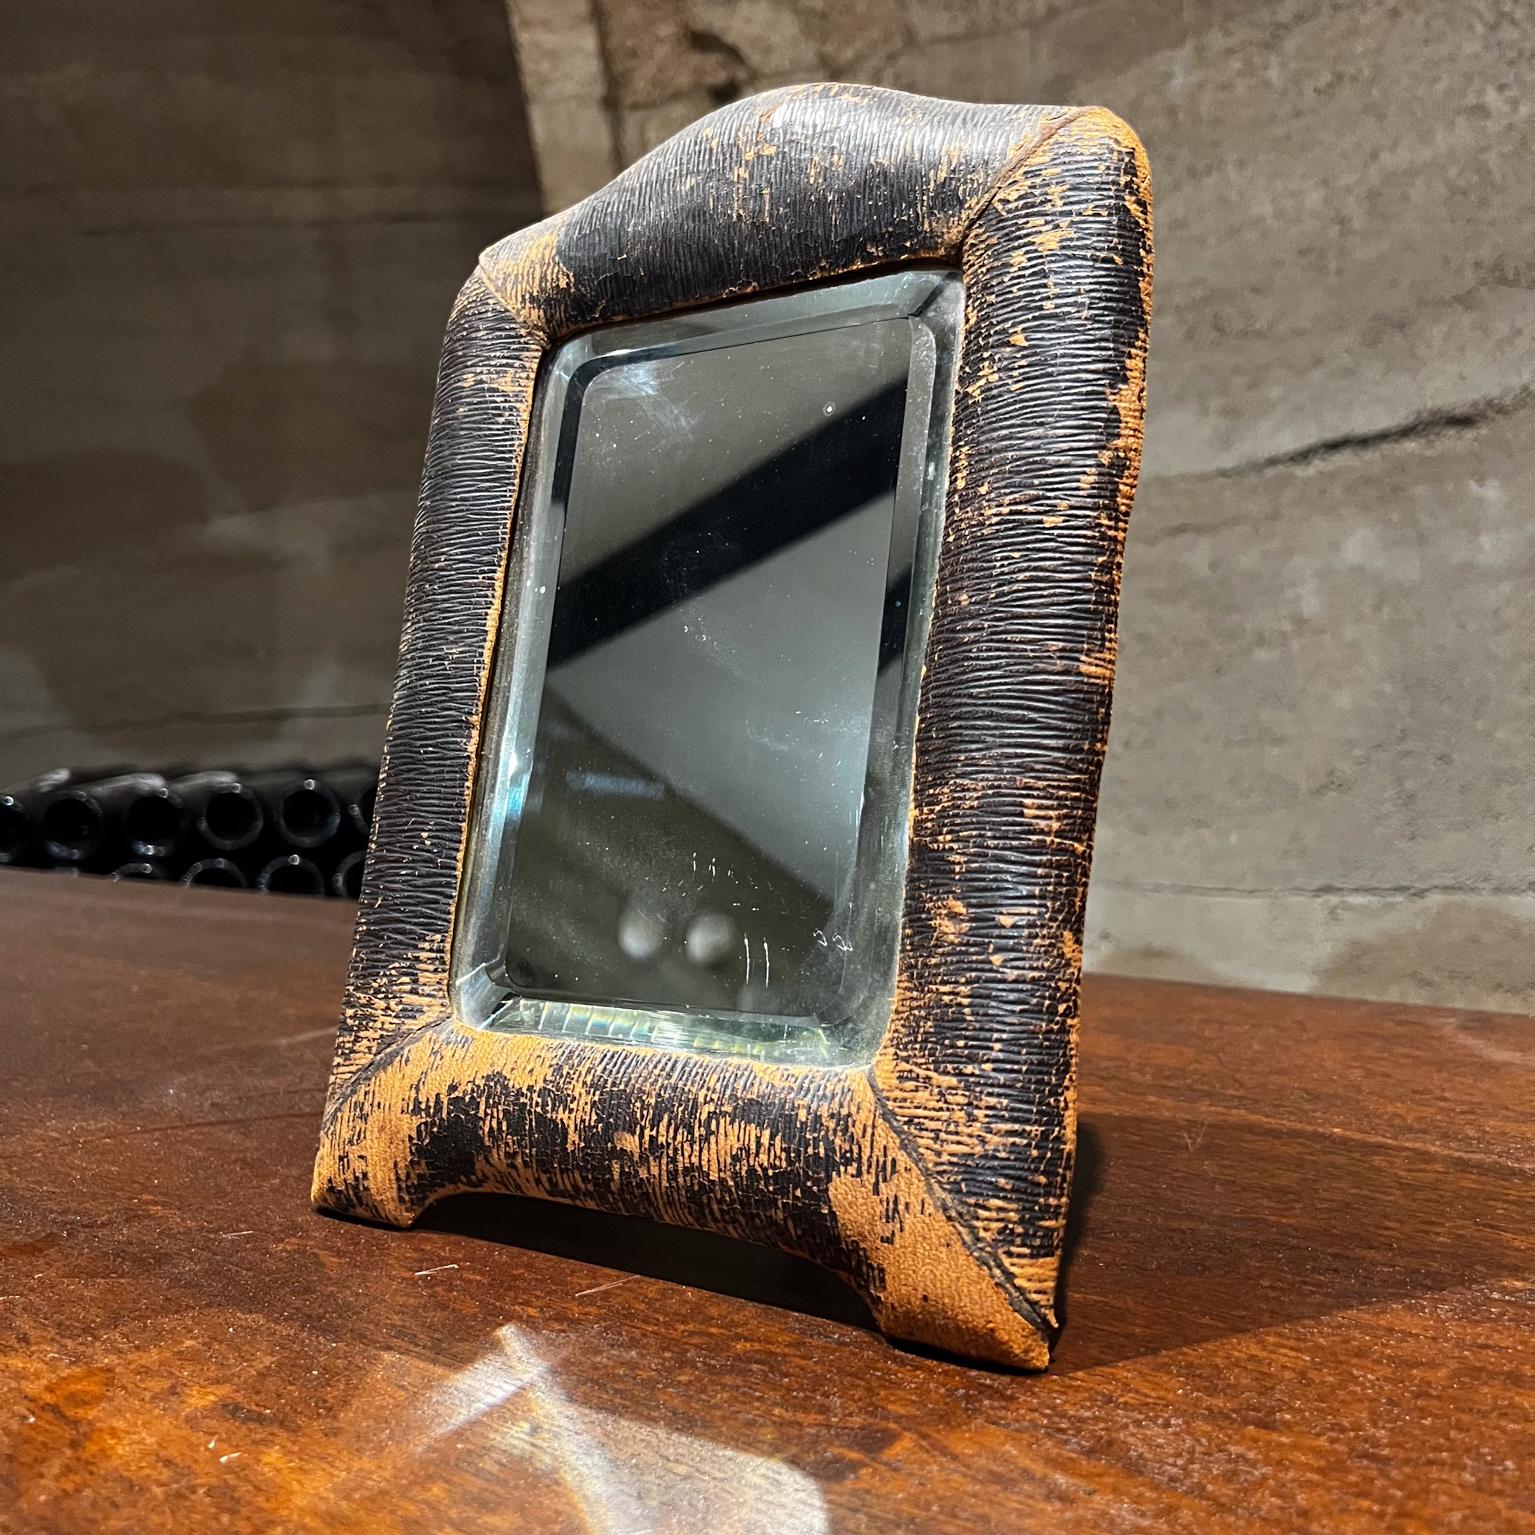 We presents
Vintage table mirror constructed with wood frame wrapped leather. The brown leather has a specific print pattern. The mirror has a beautiful, beveled edge with a smooth transition around the corners. The flat screws are original to the